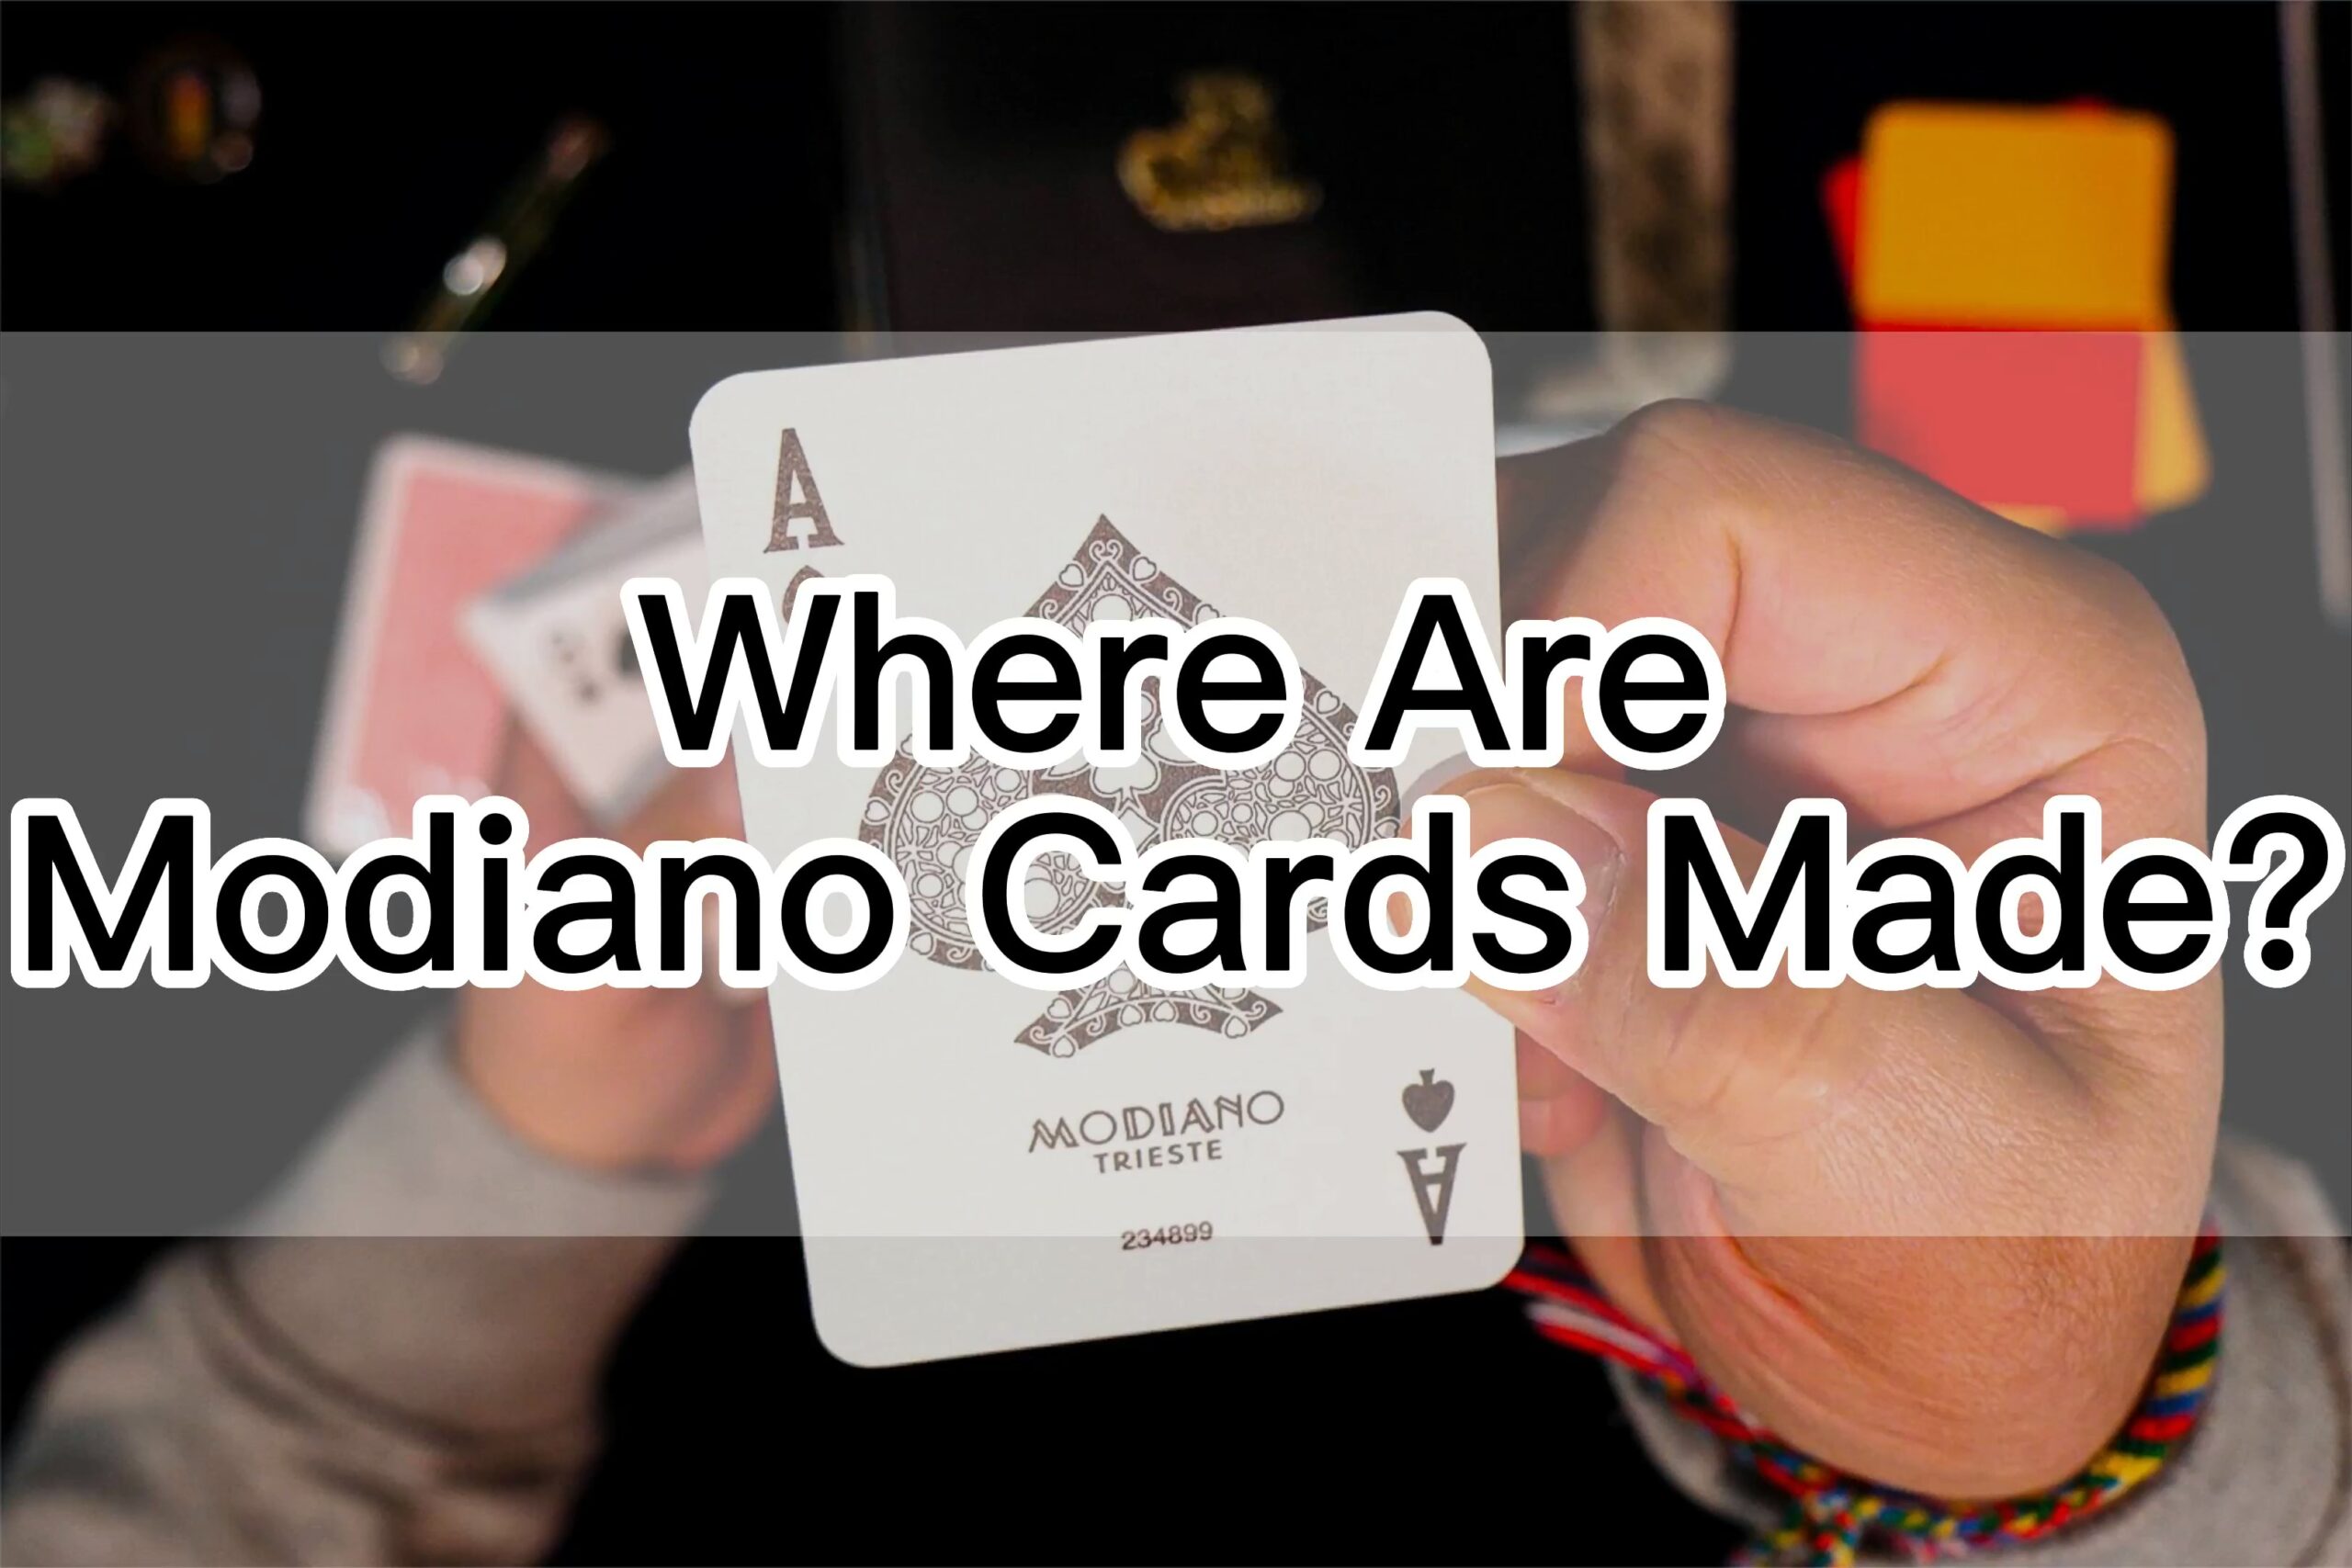 Where Are Modiano Cards Made